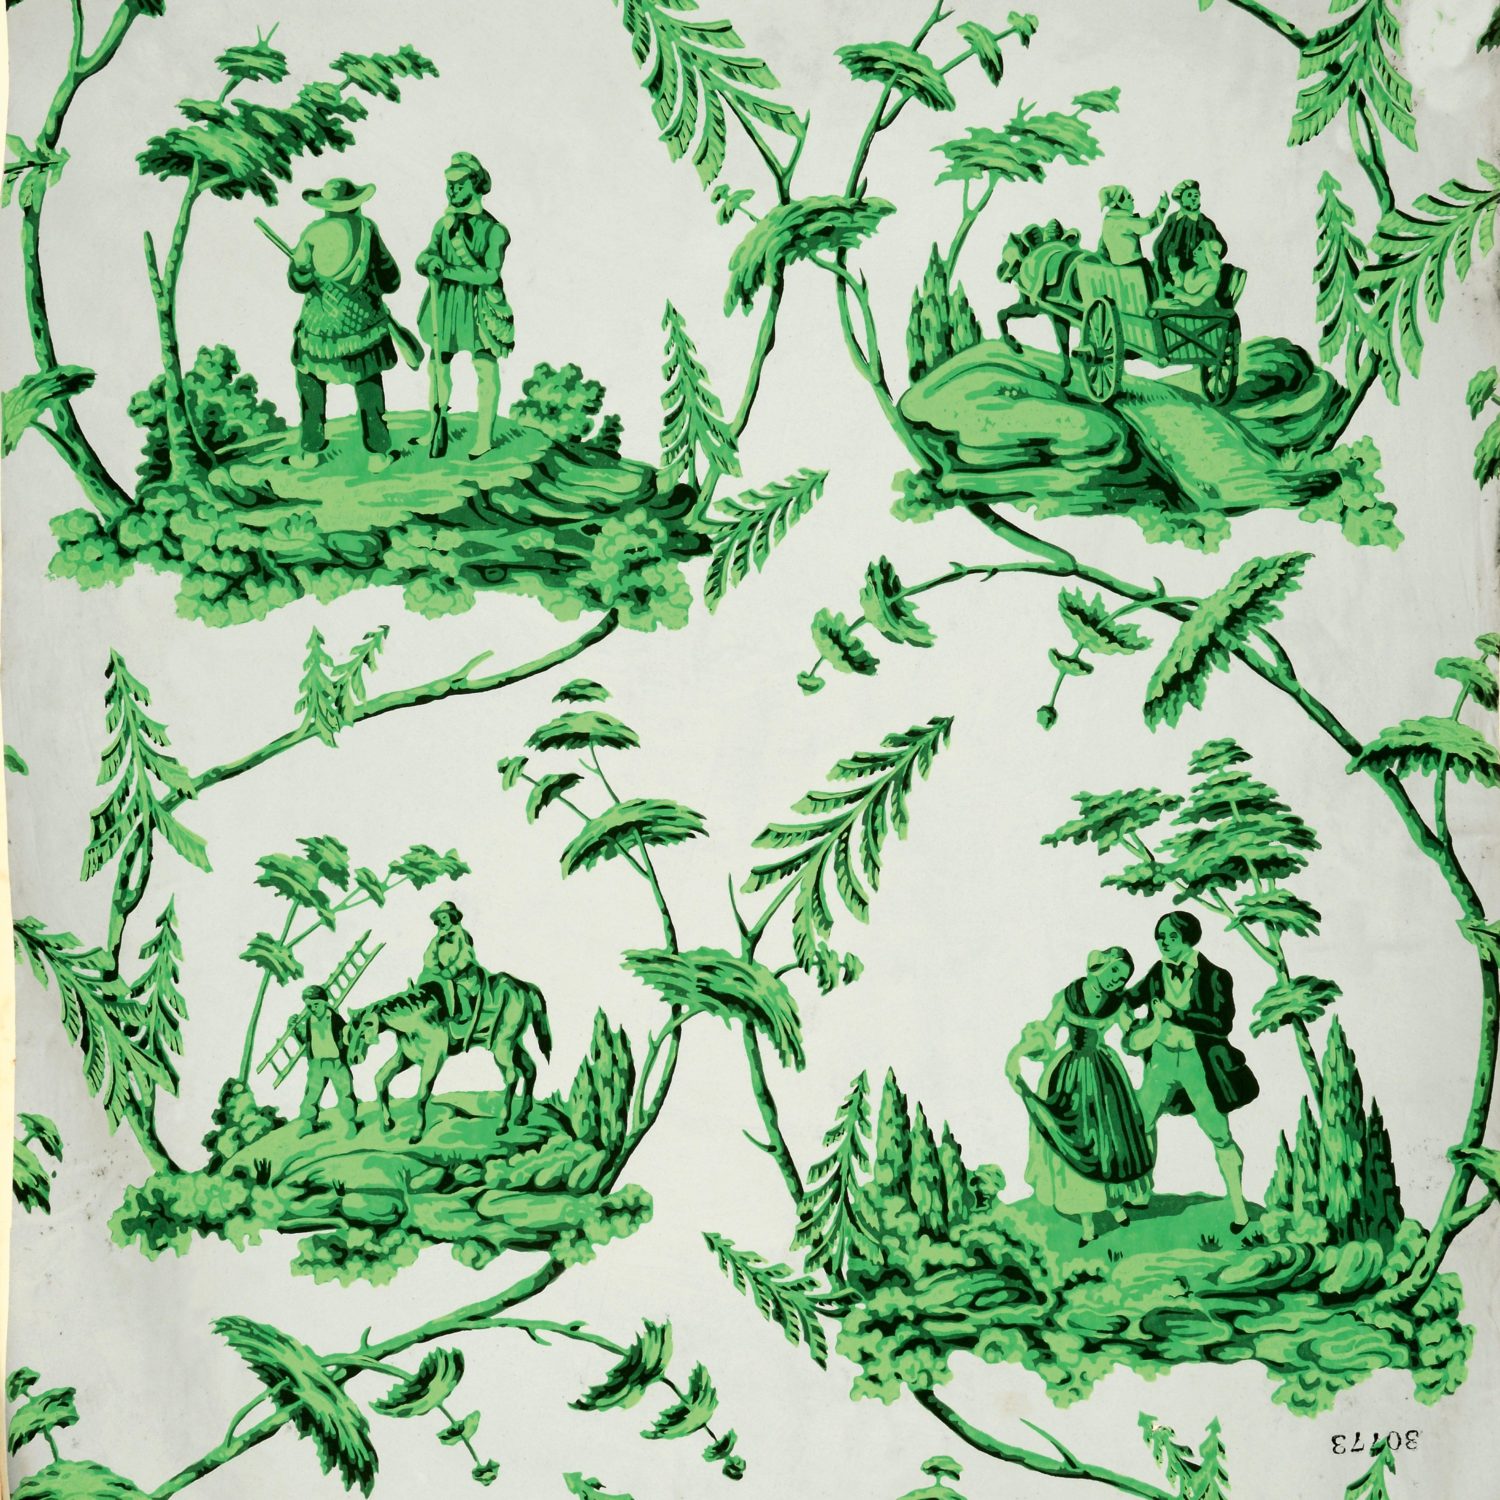 The Vivid Green Used In Wallpaper Was Derived From Toxic Copper Victorian Era Wallpaper Could This Kill You Lethal Angeles Art College. Fine Art